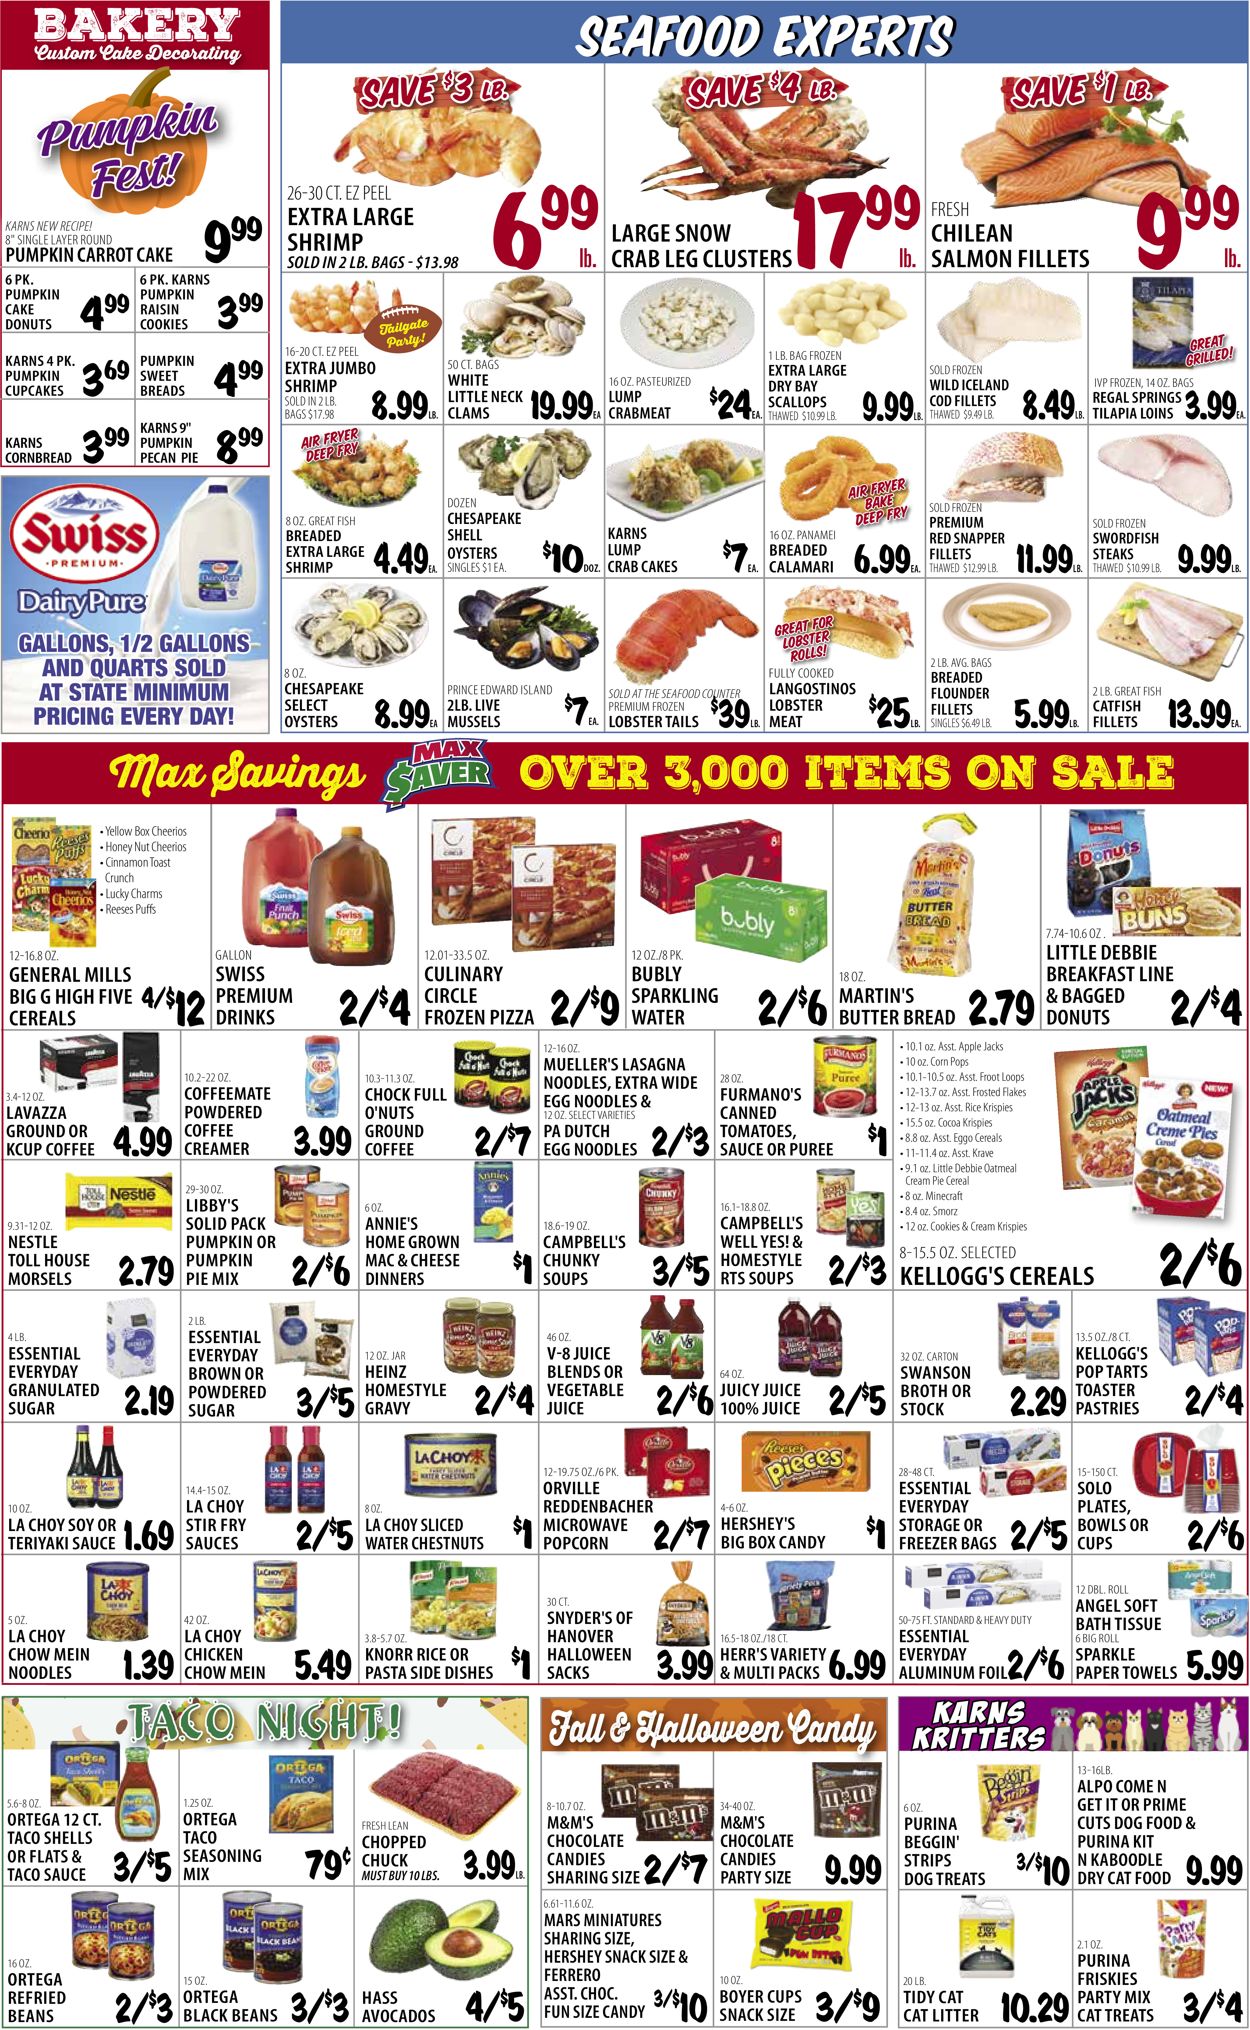 Karns Quality Foods Ad from 10/19/2021